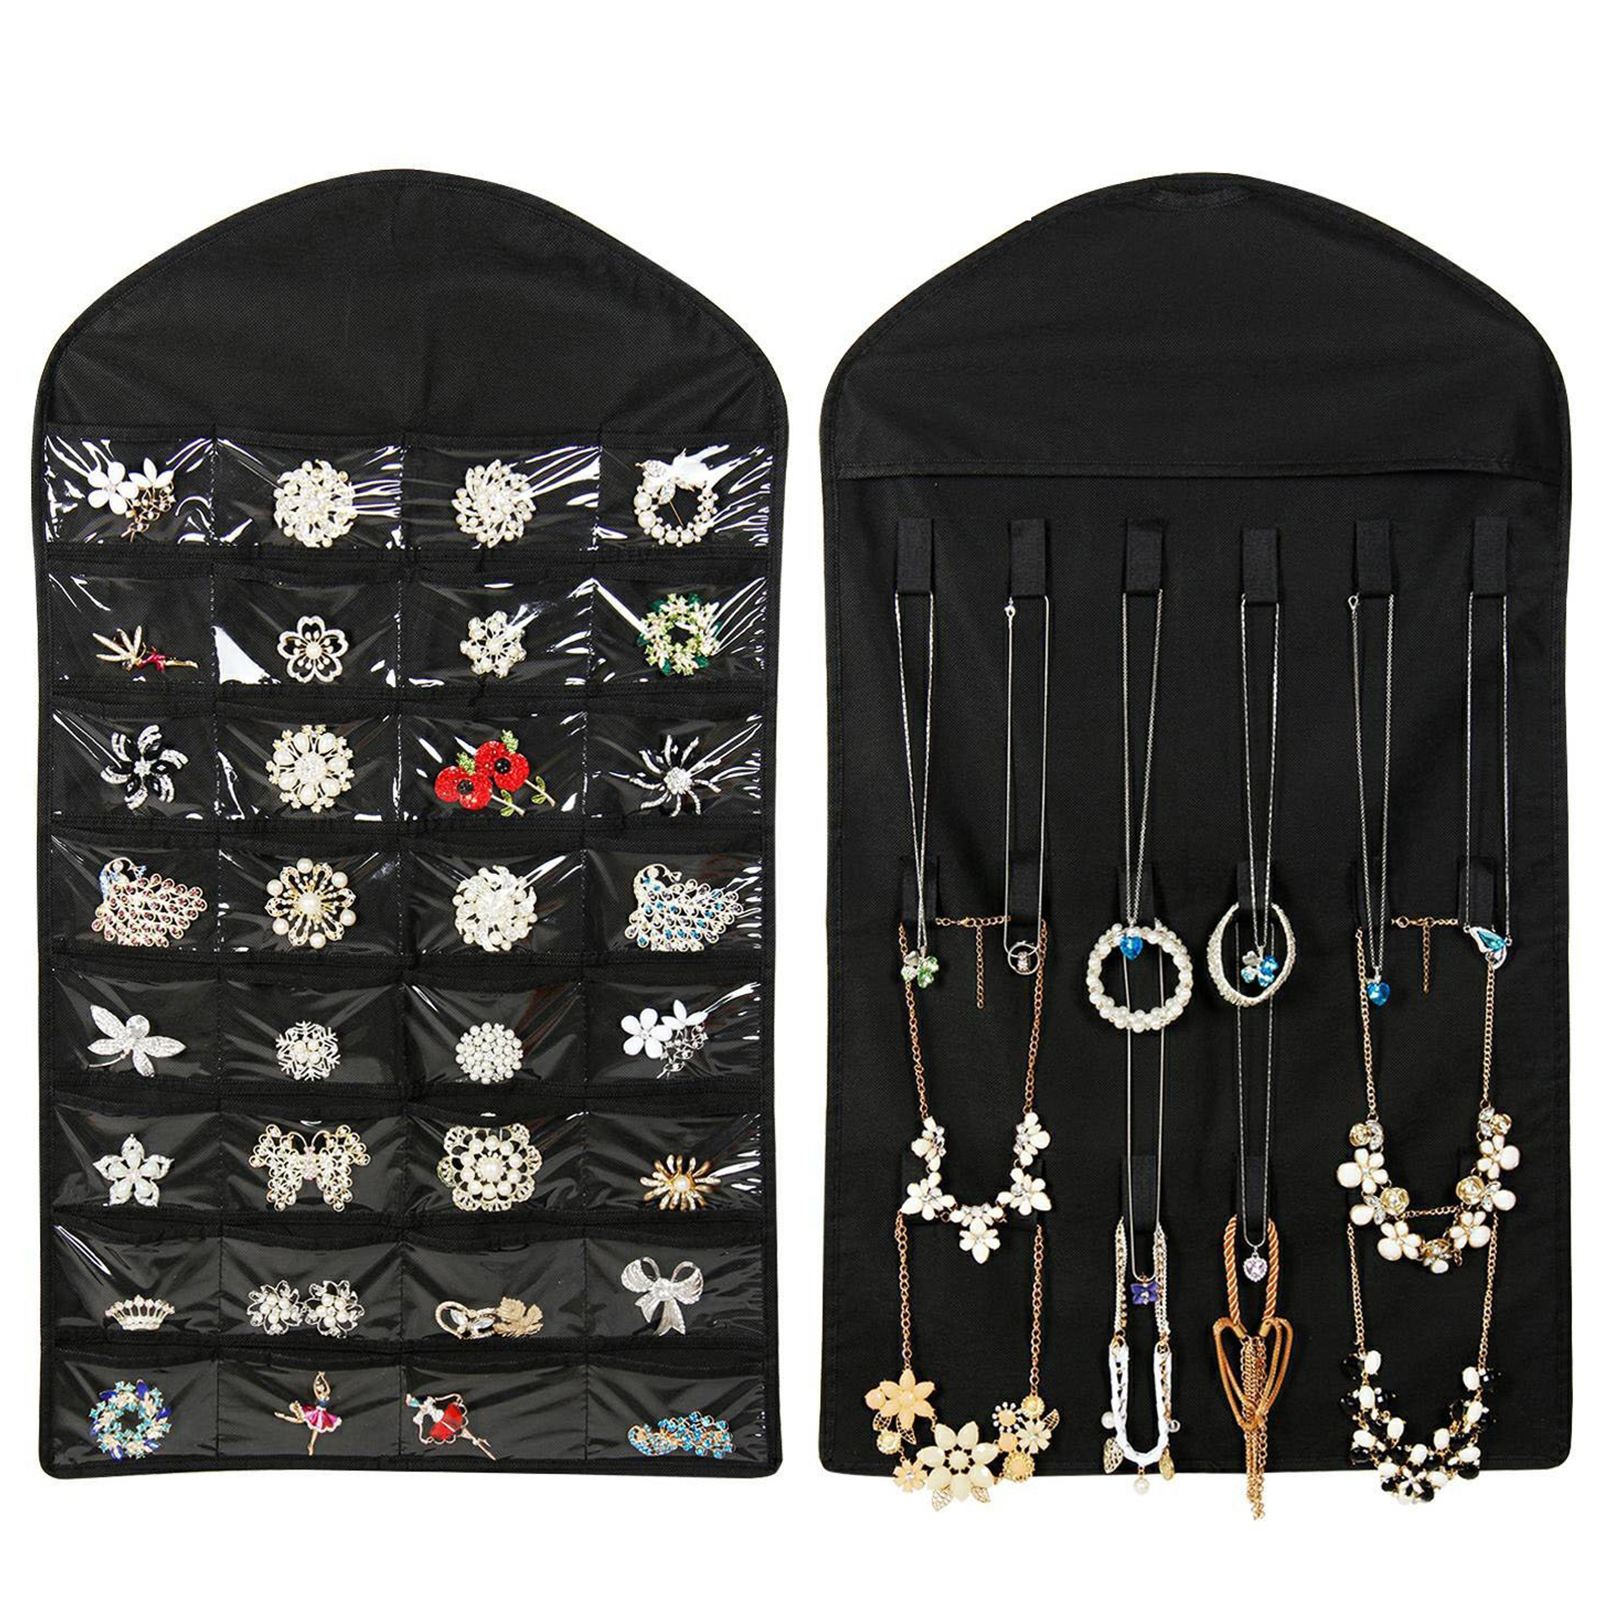 TSV Hanging Jewelry Organizer, Double Sided Holder Bag Closet Storage for Earrings Necklace ...